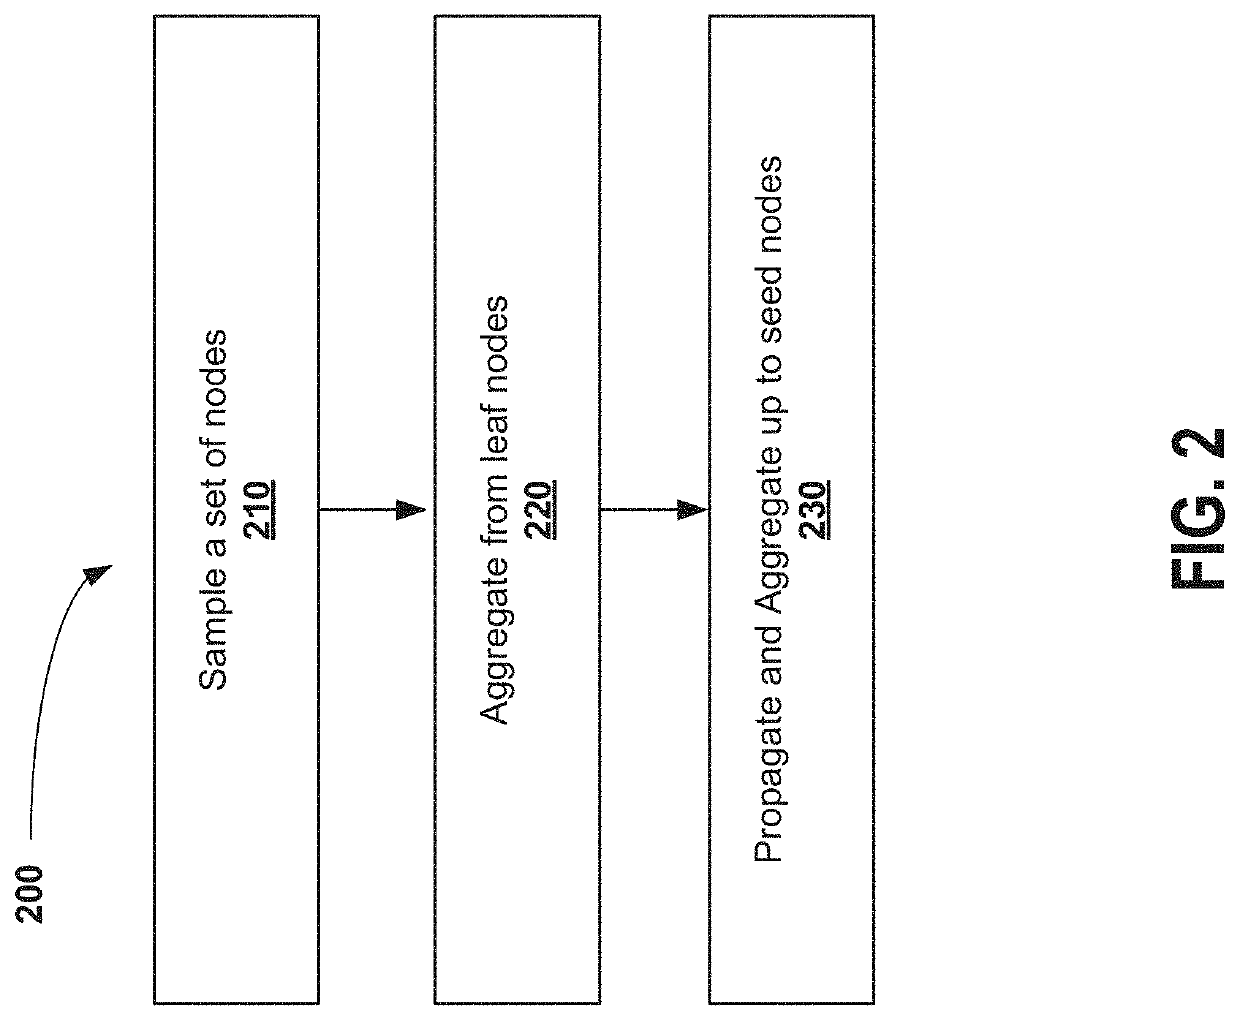 System and method for machine learning architecture with privacy-preserving node embeddings